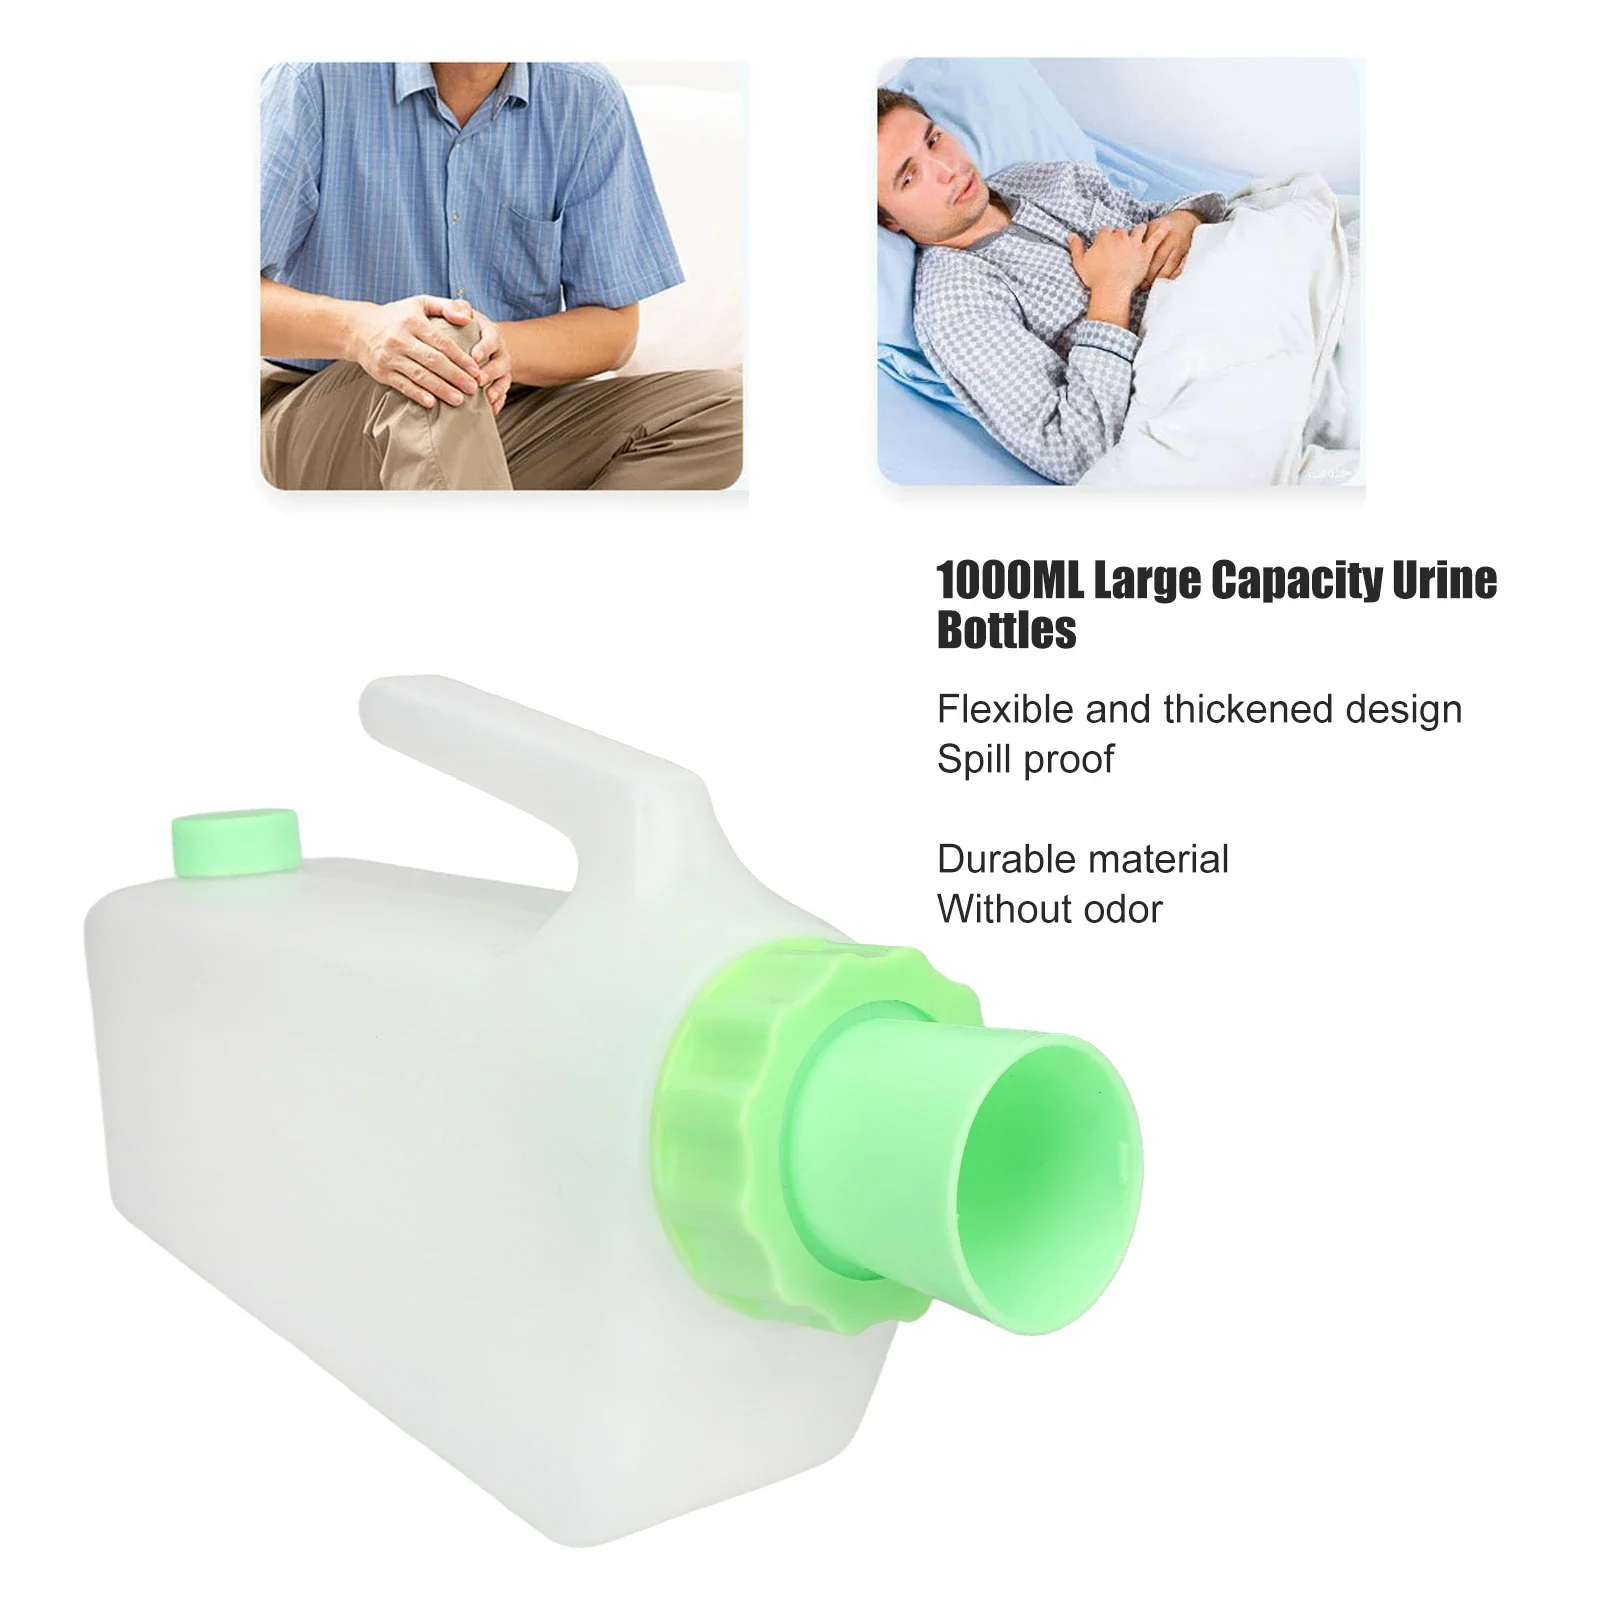 Male Urine Bottle Reusable Spill Proof Thicken Portable 1000ml Urinal with Lid for Men elderly Care Urine Bottle